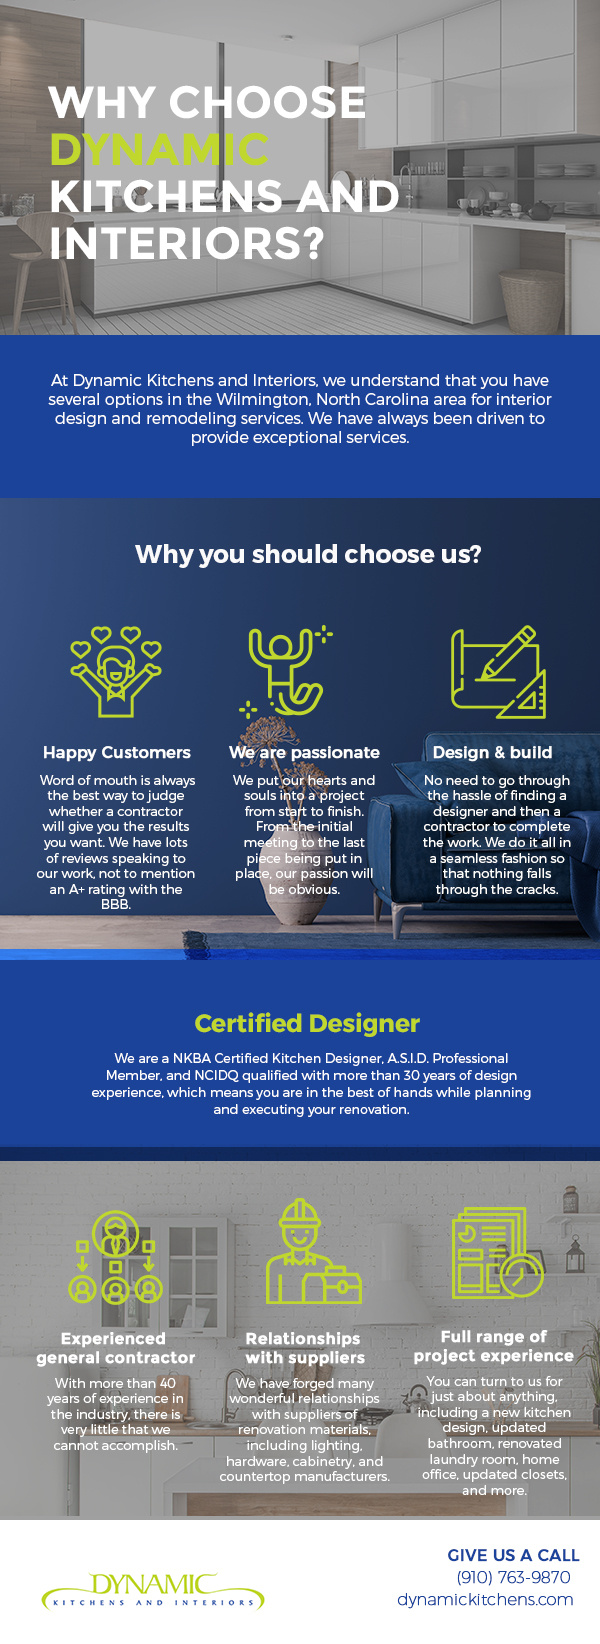 Why Choose Dynamic Kitchens and Interiors? {infographic]